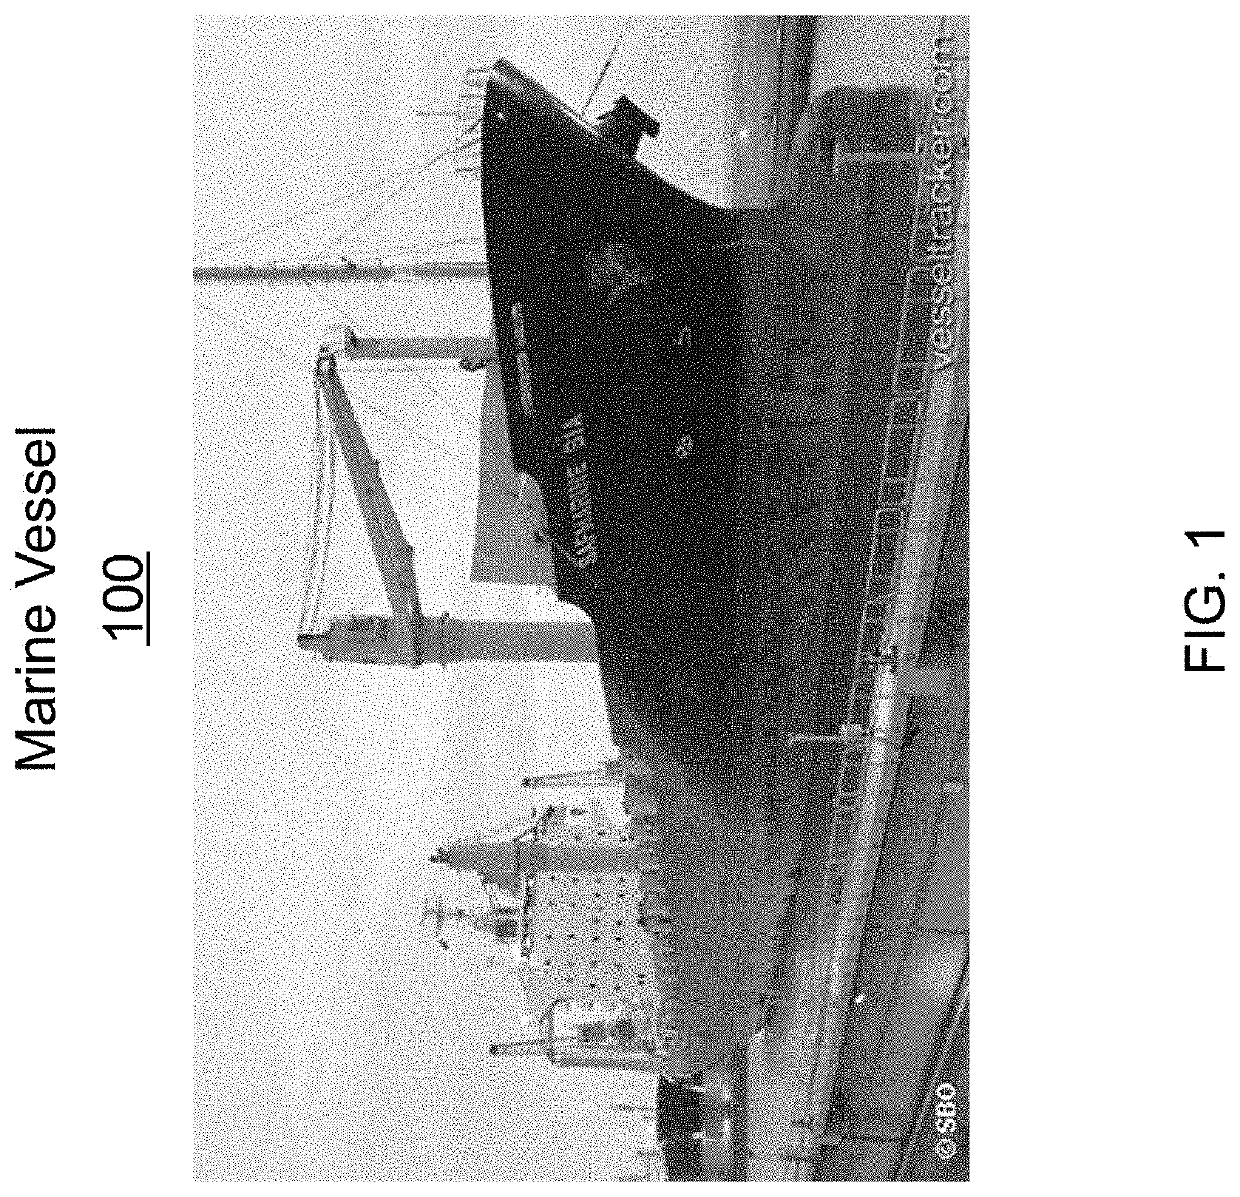 System and method for optimizing fuel usage of a marine vessel